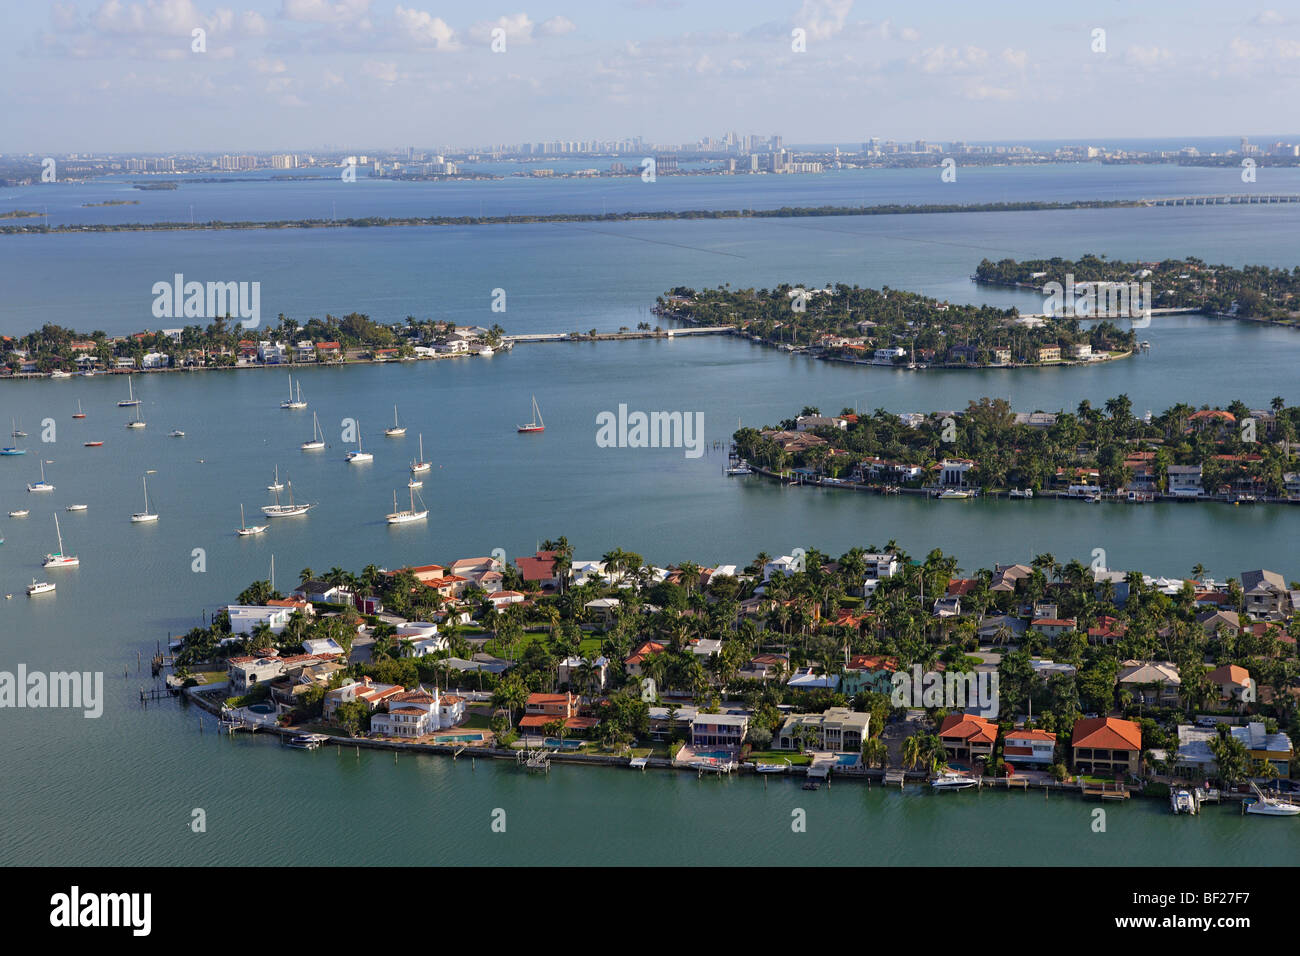 Aerial view of Palm Island and Hibiscus Island, Islands at Biscayne Bay at daytime, Florida, USA Stock Photo